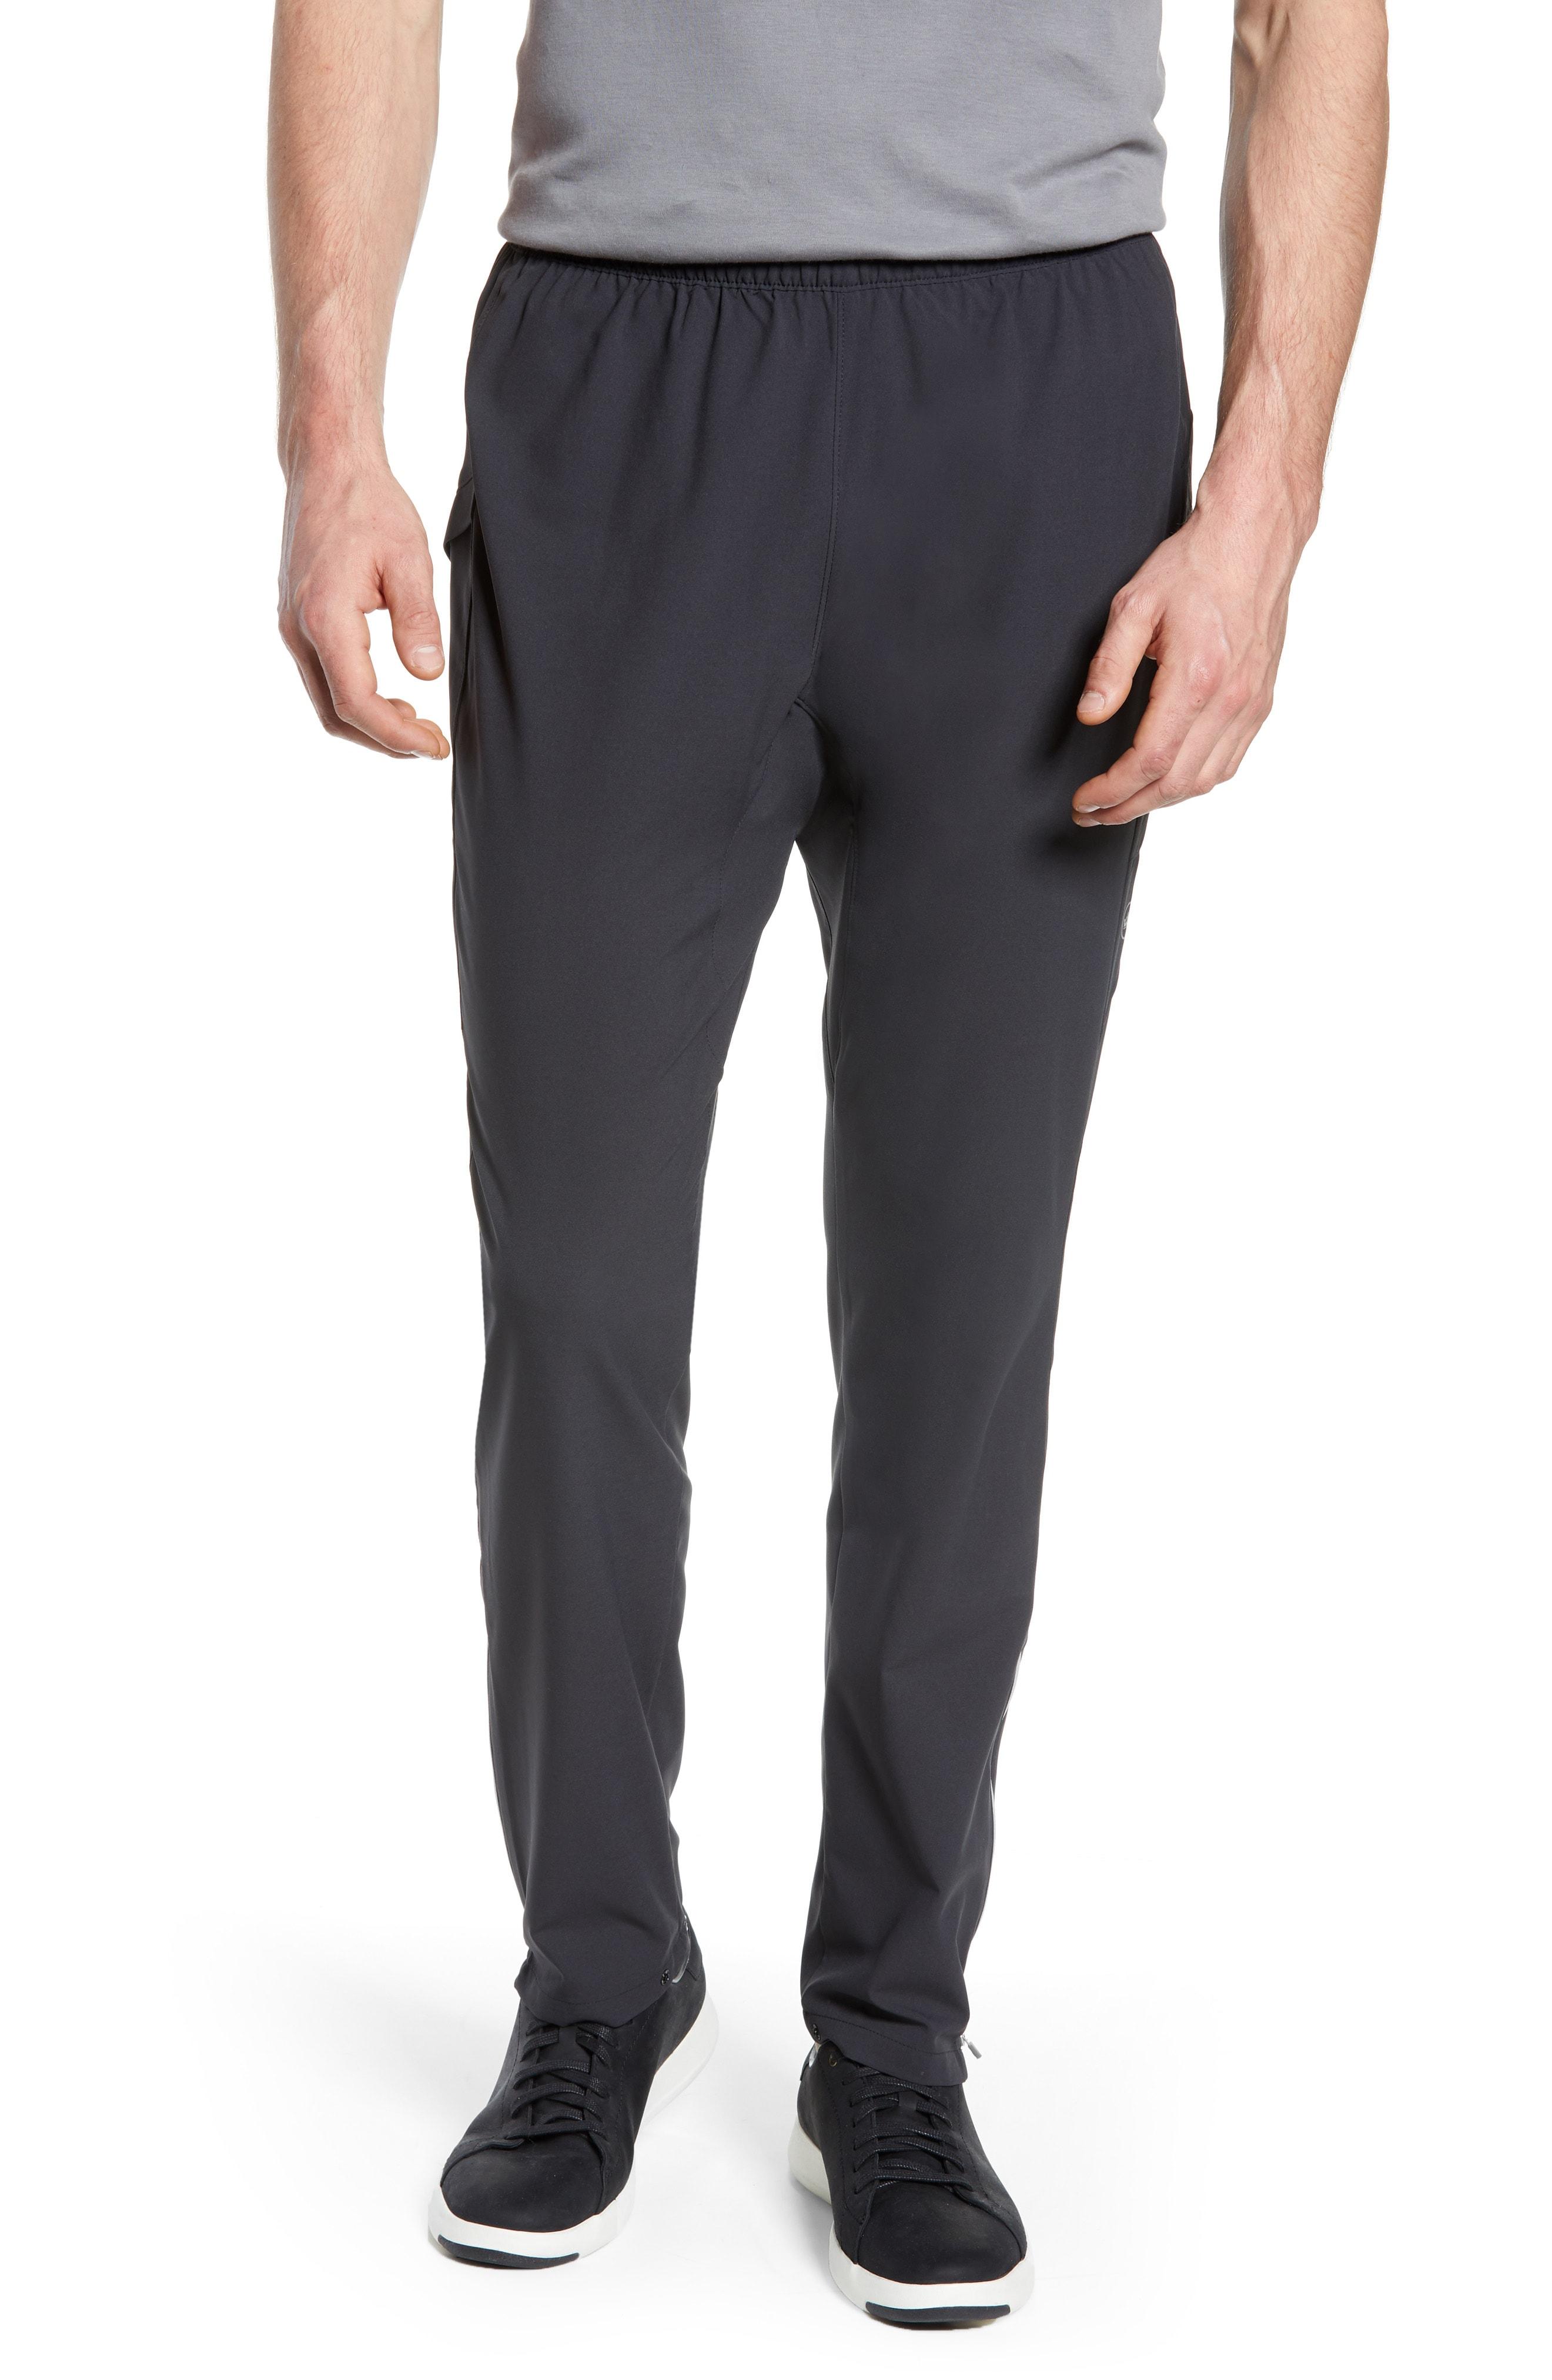 Lyst - Peter Millar Vancouver Action Training Pants for Men